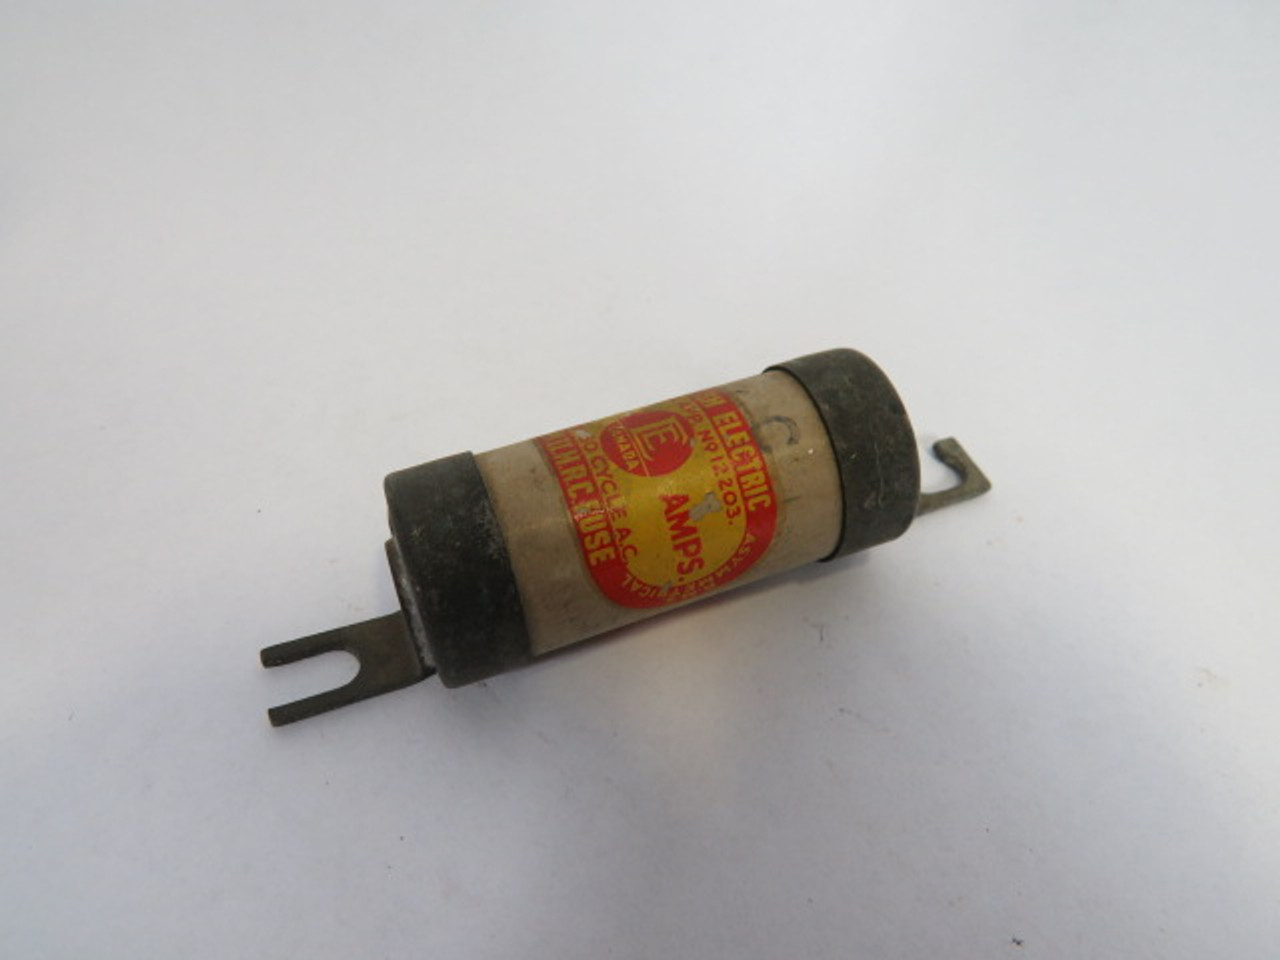 English Electric CIS-20 Bolt on Fuse 20A 600V USED